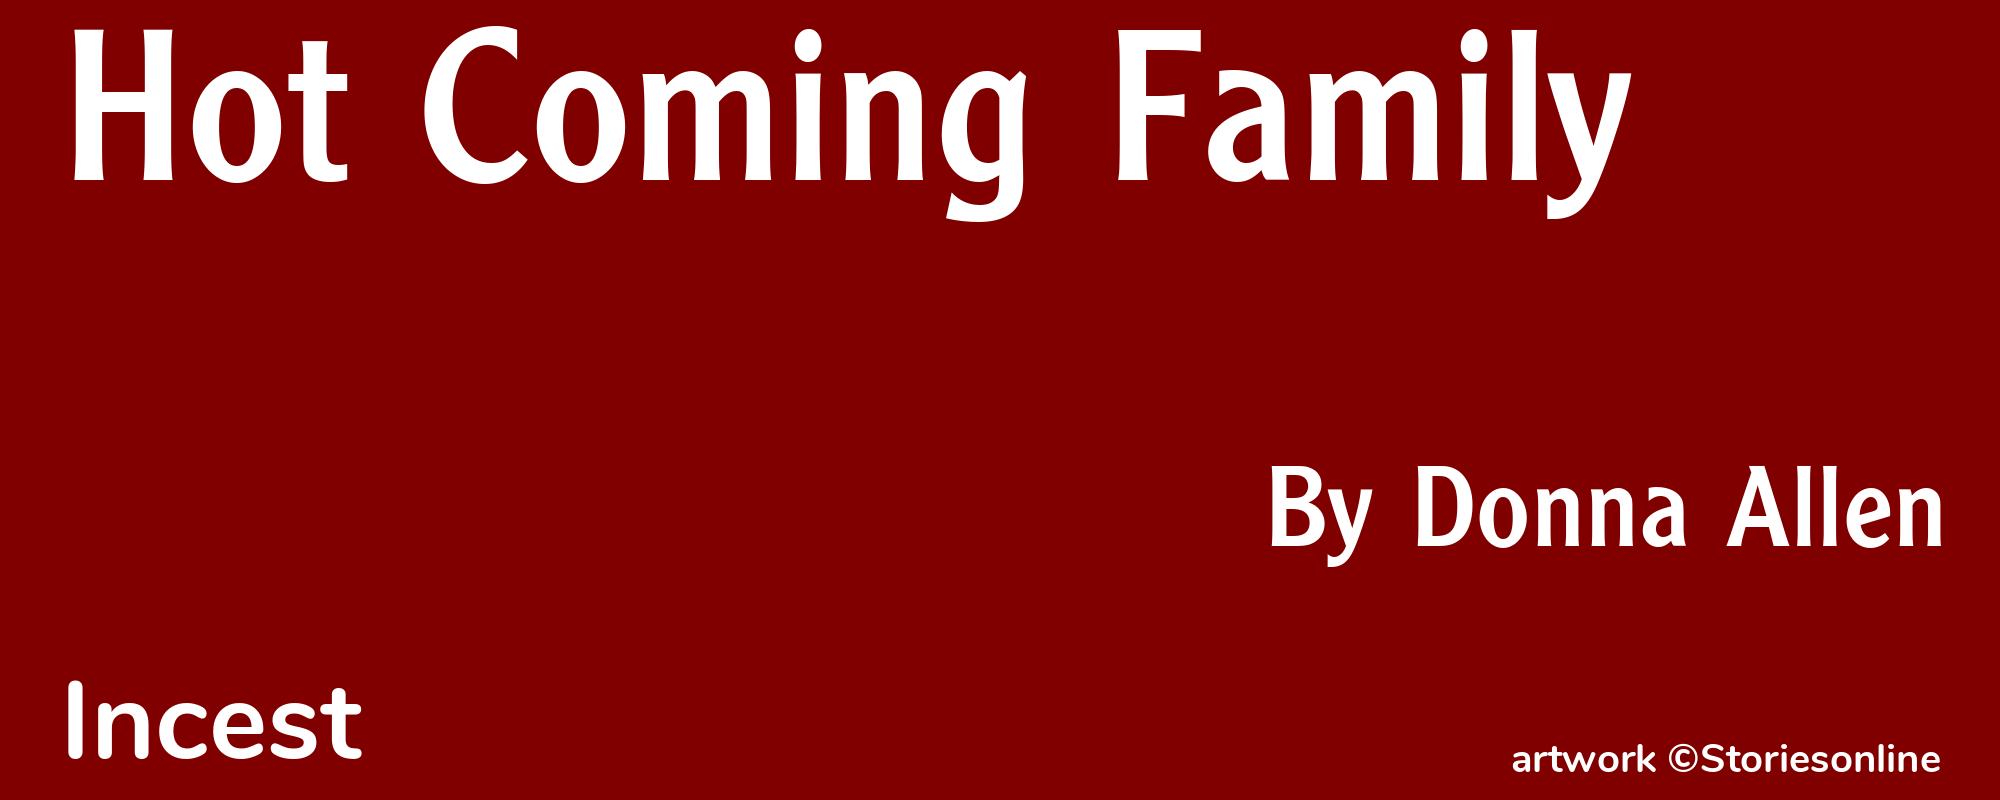 Hot Coming Family - Cover